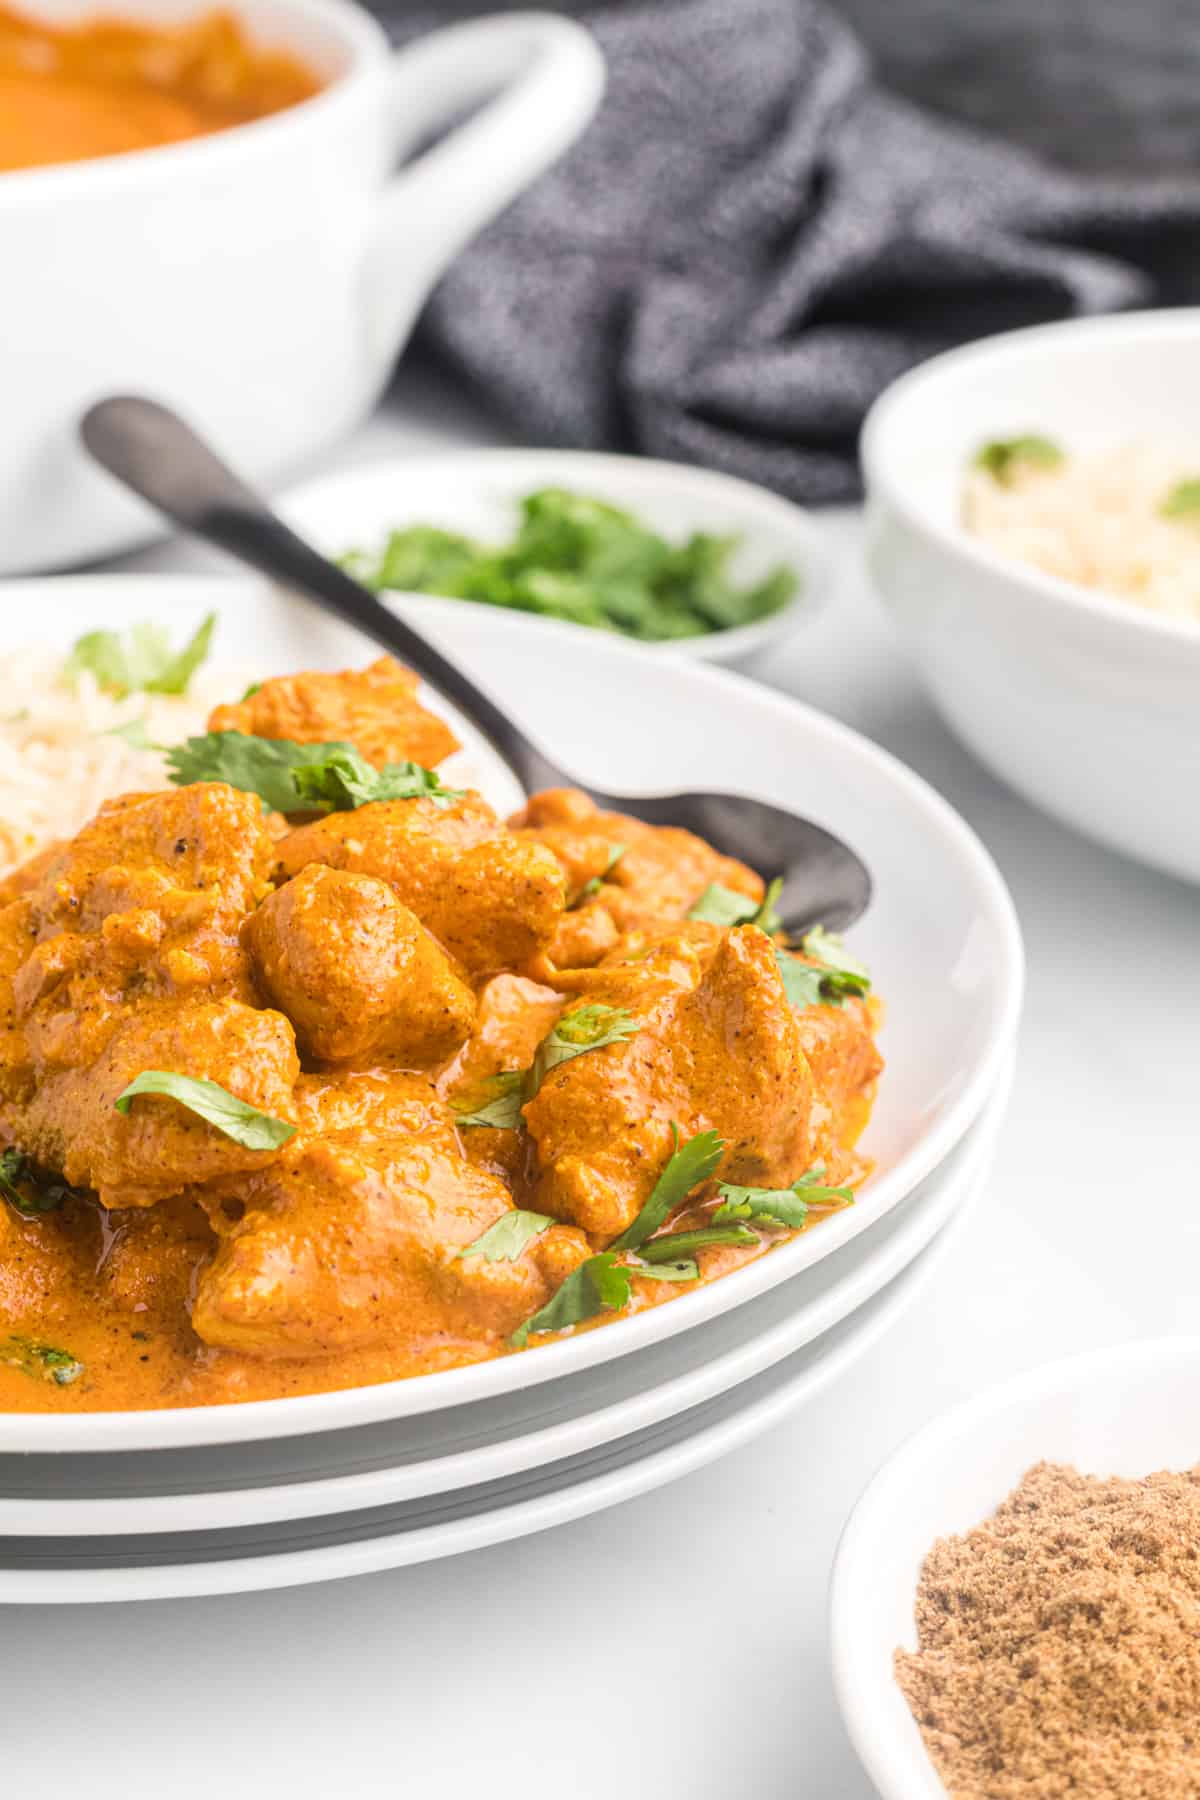 A spoon is placed on a plate with chicken tikka masala.